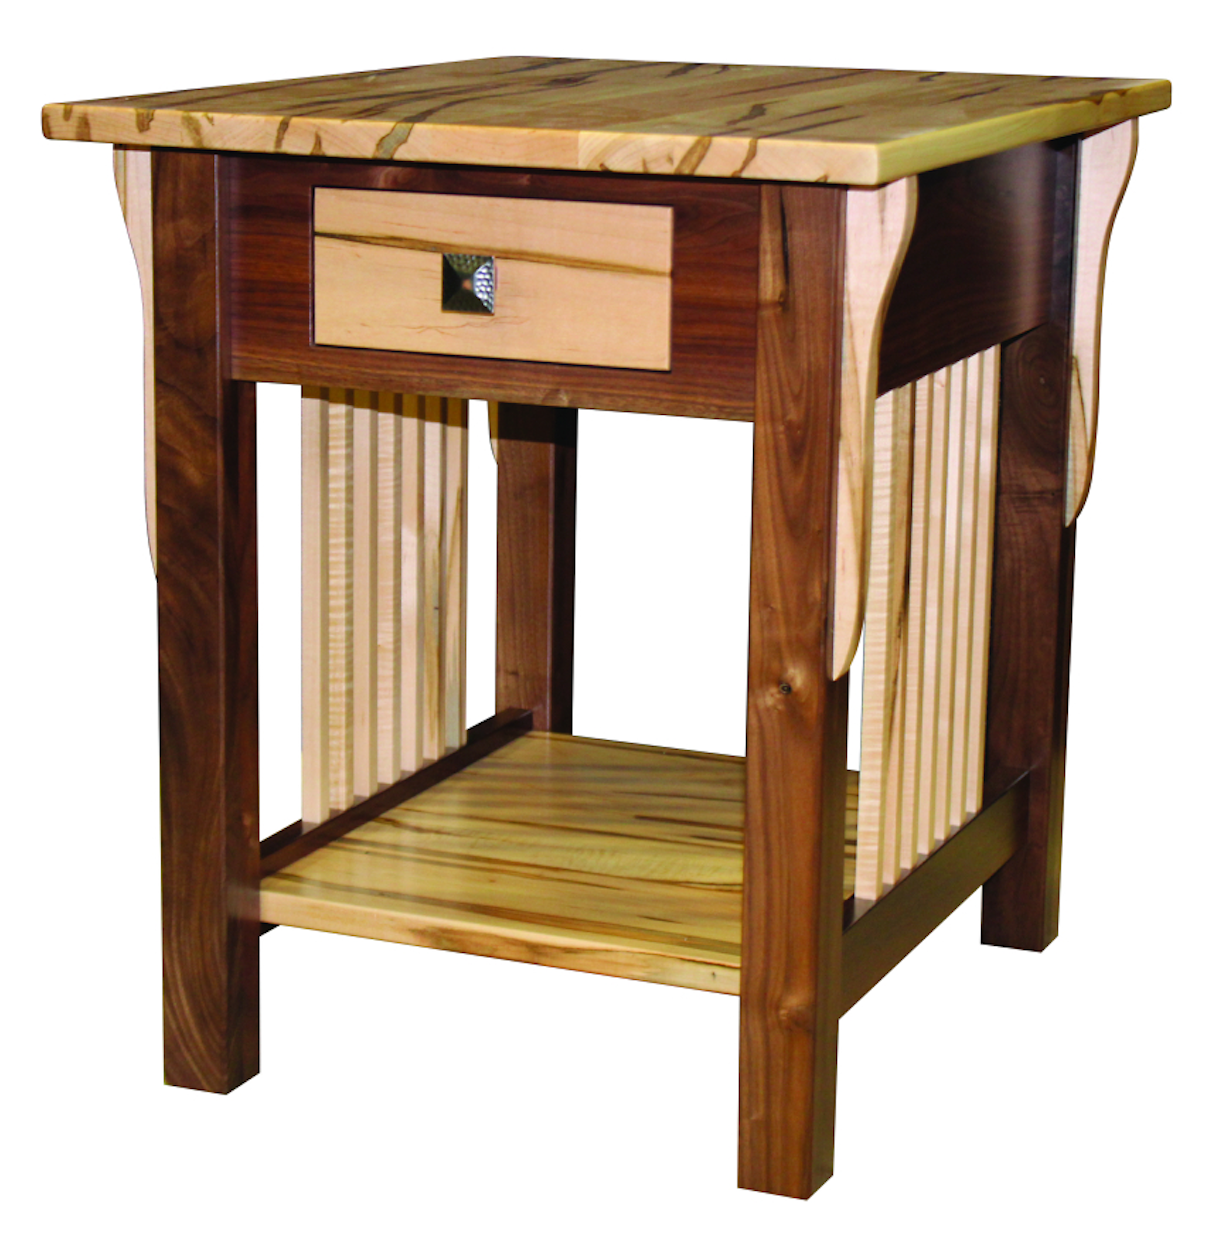 Prairie Mission Wormy Maple and Walnut 19" x 24" End Table